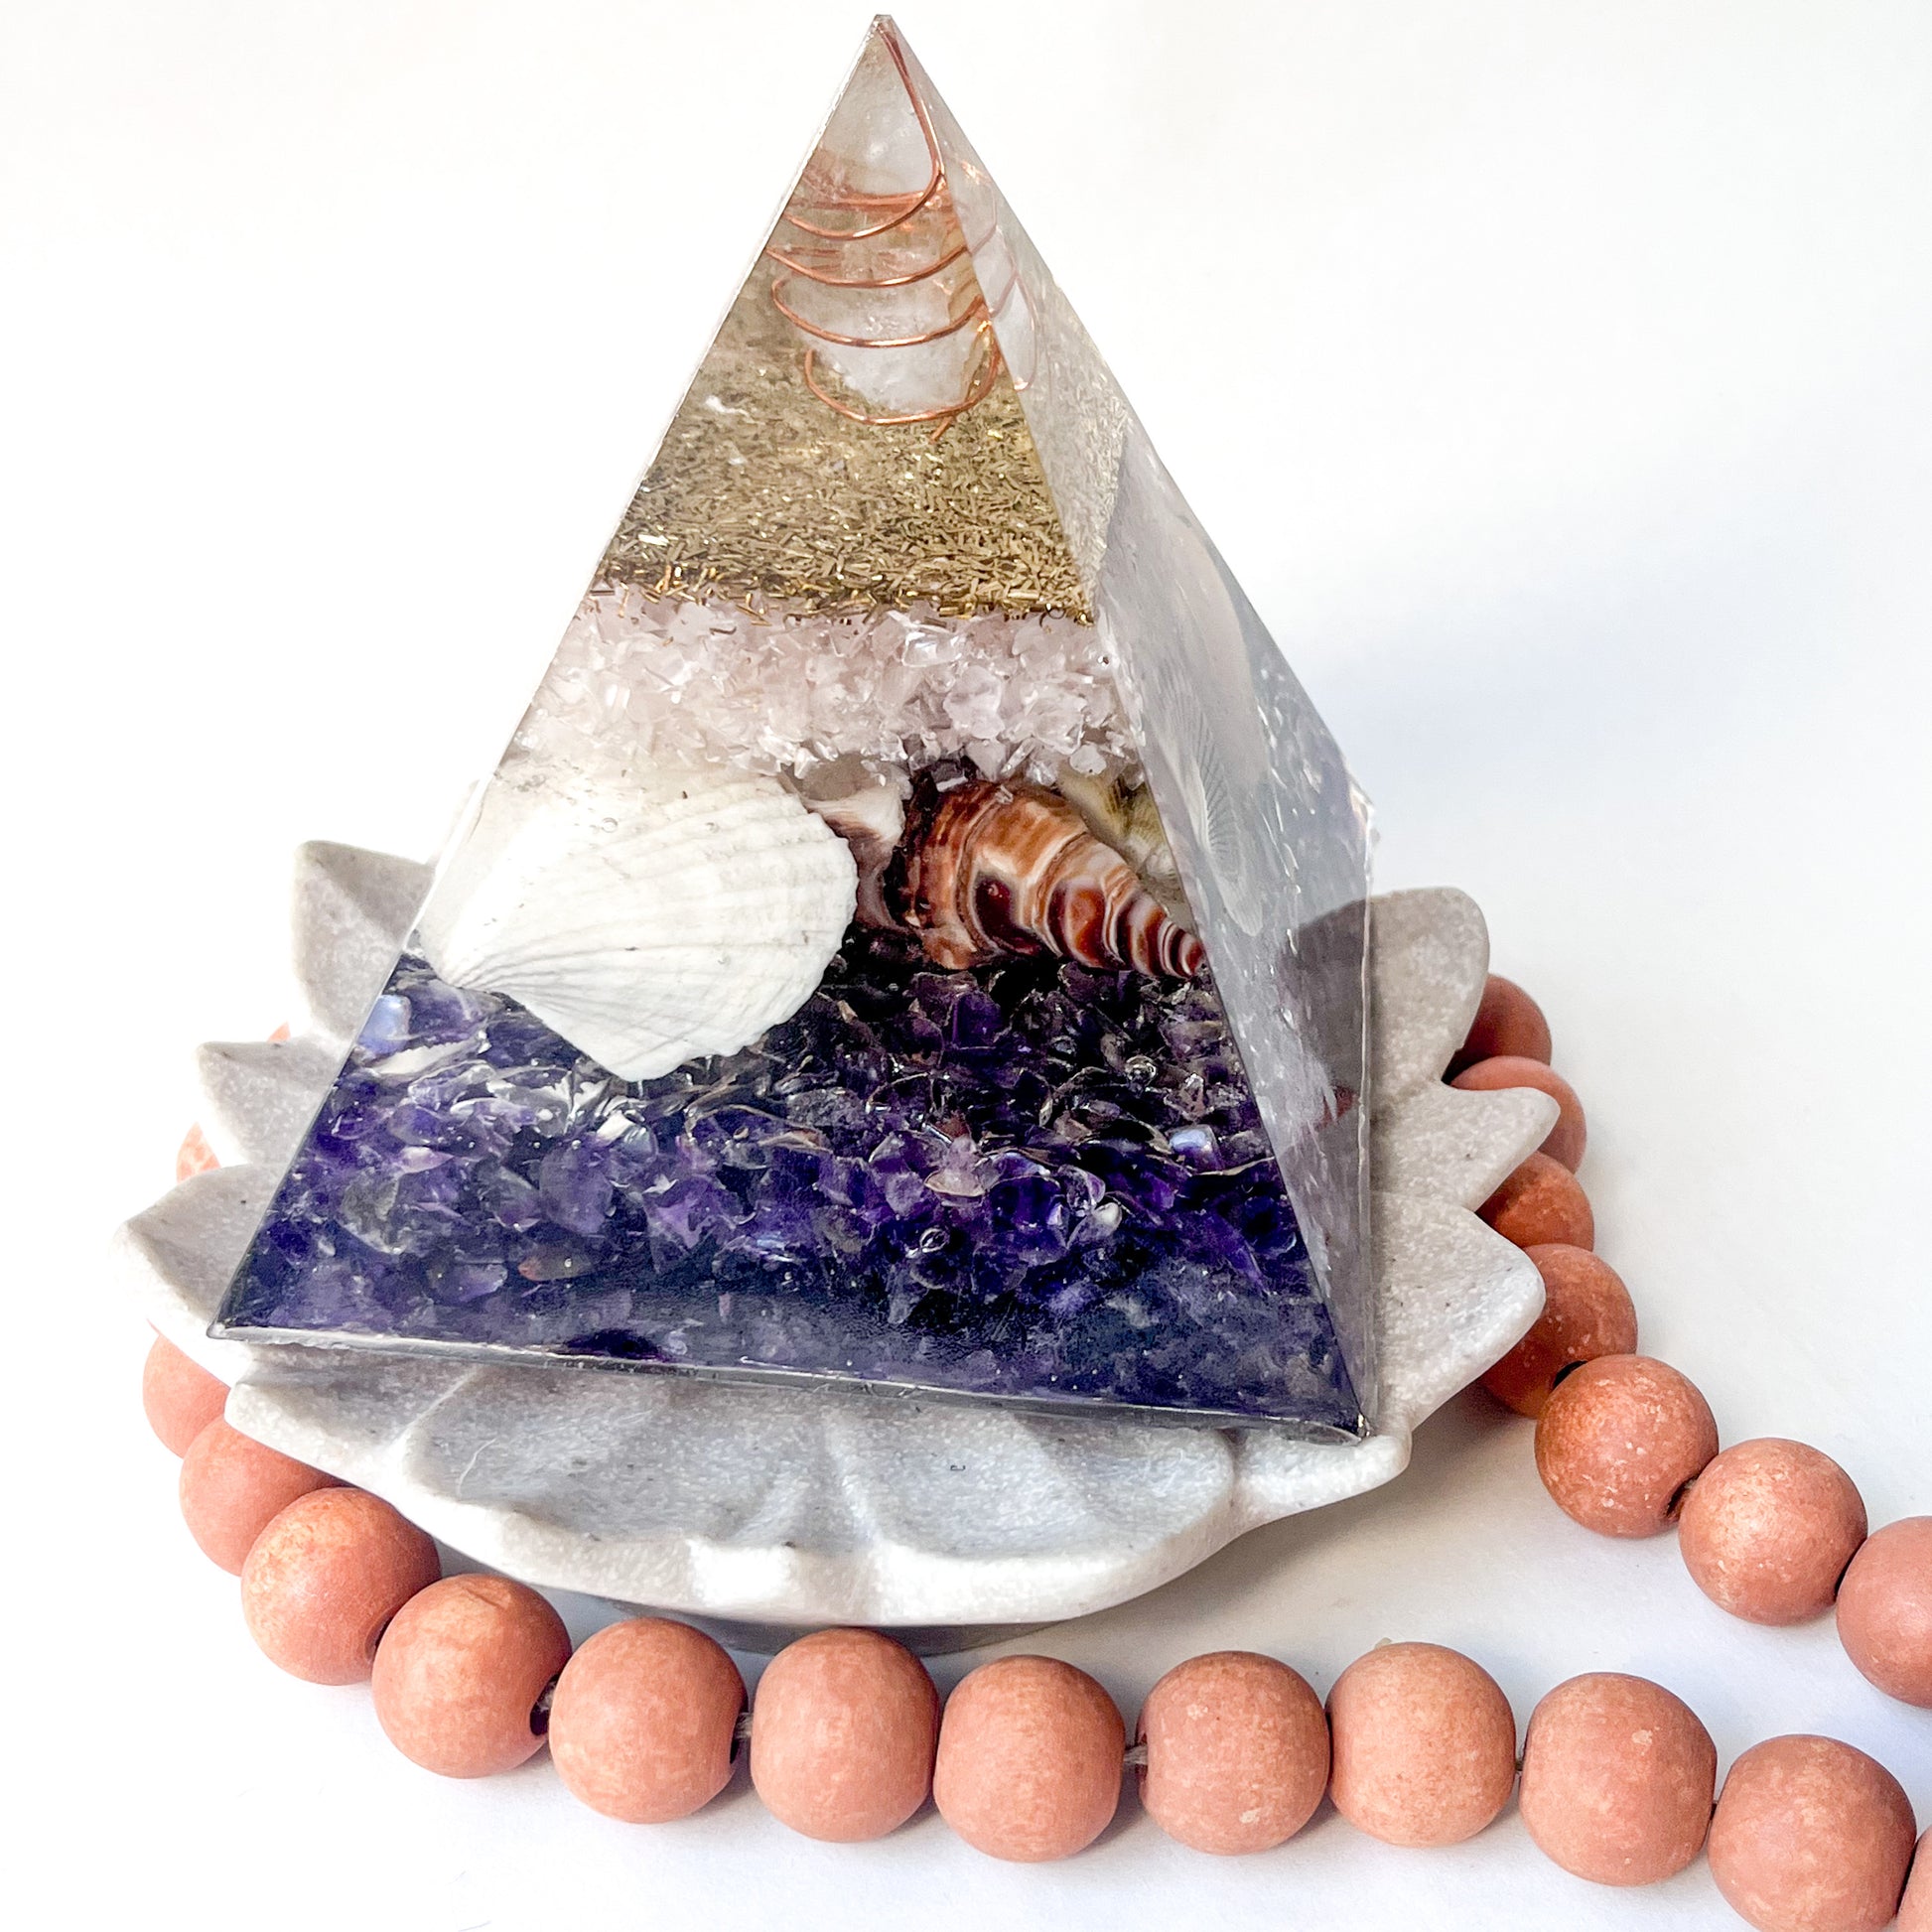 "Organic and inorganic orgonite pyramid for enhancing your aura and wellbeing